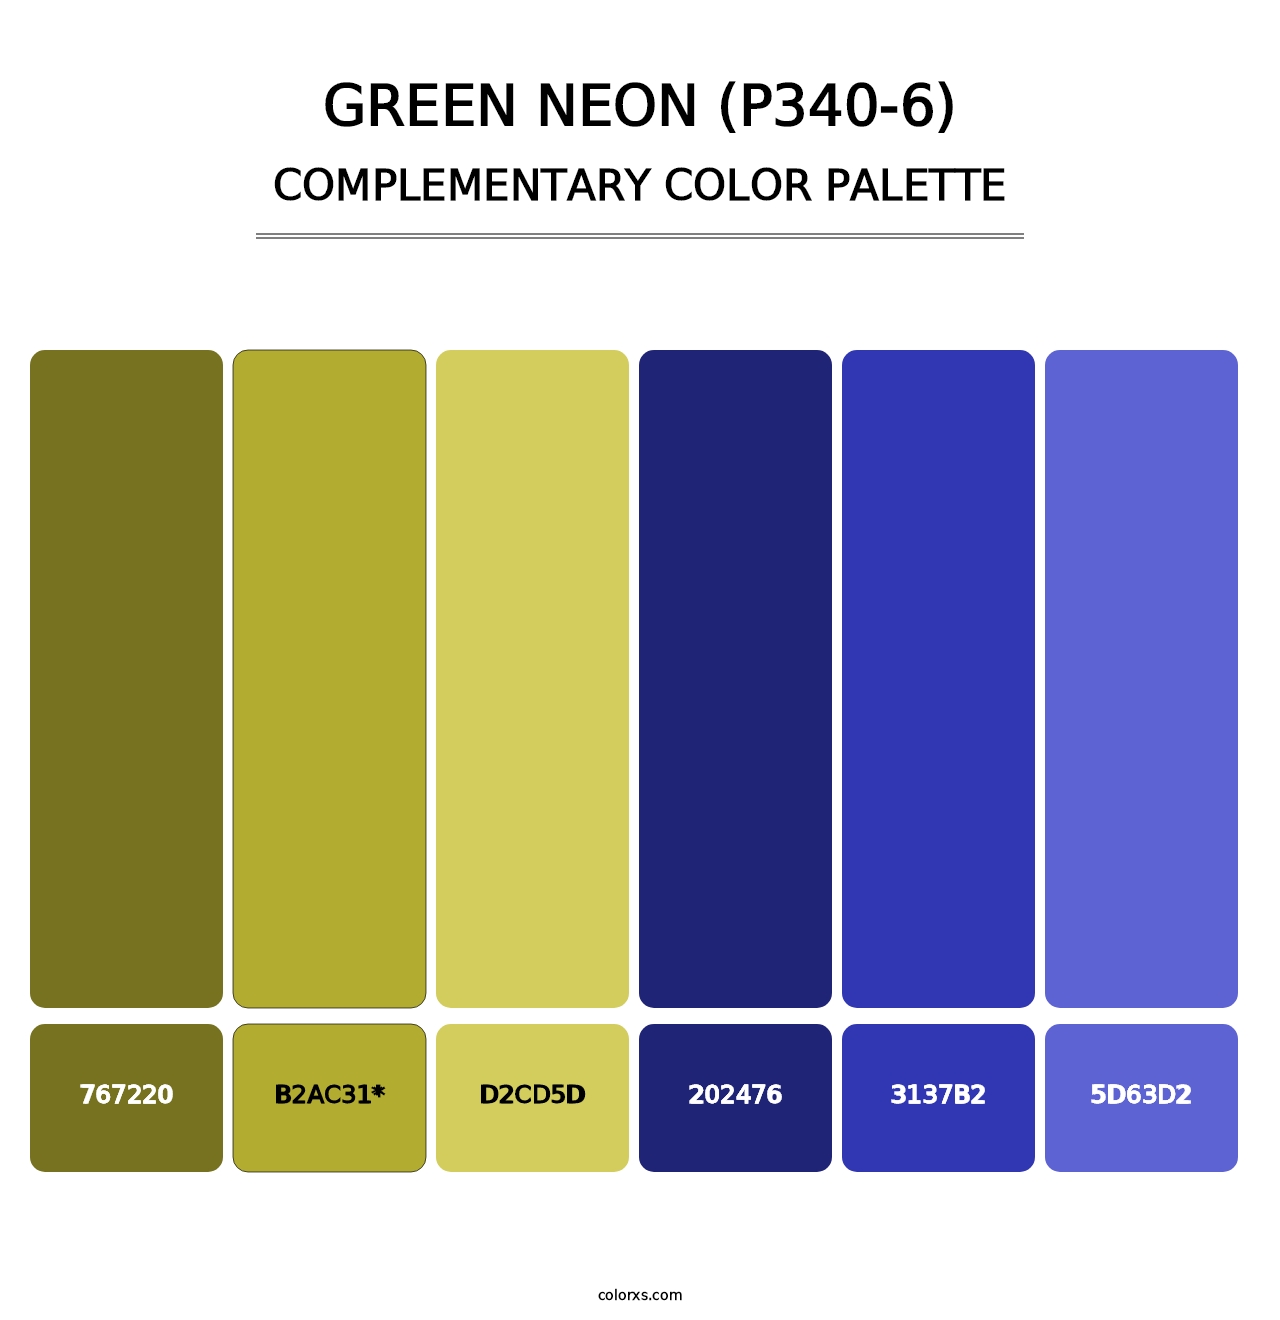 Green Neon (P340-6) - Complementary Color Palette